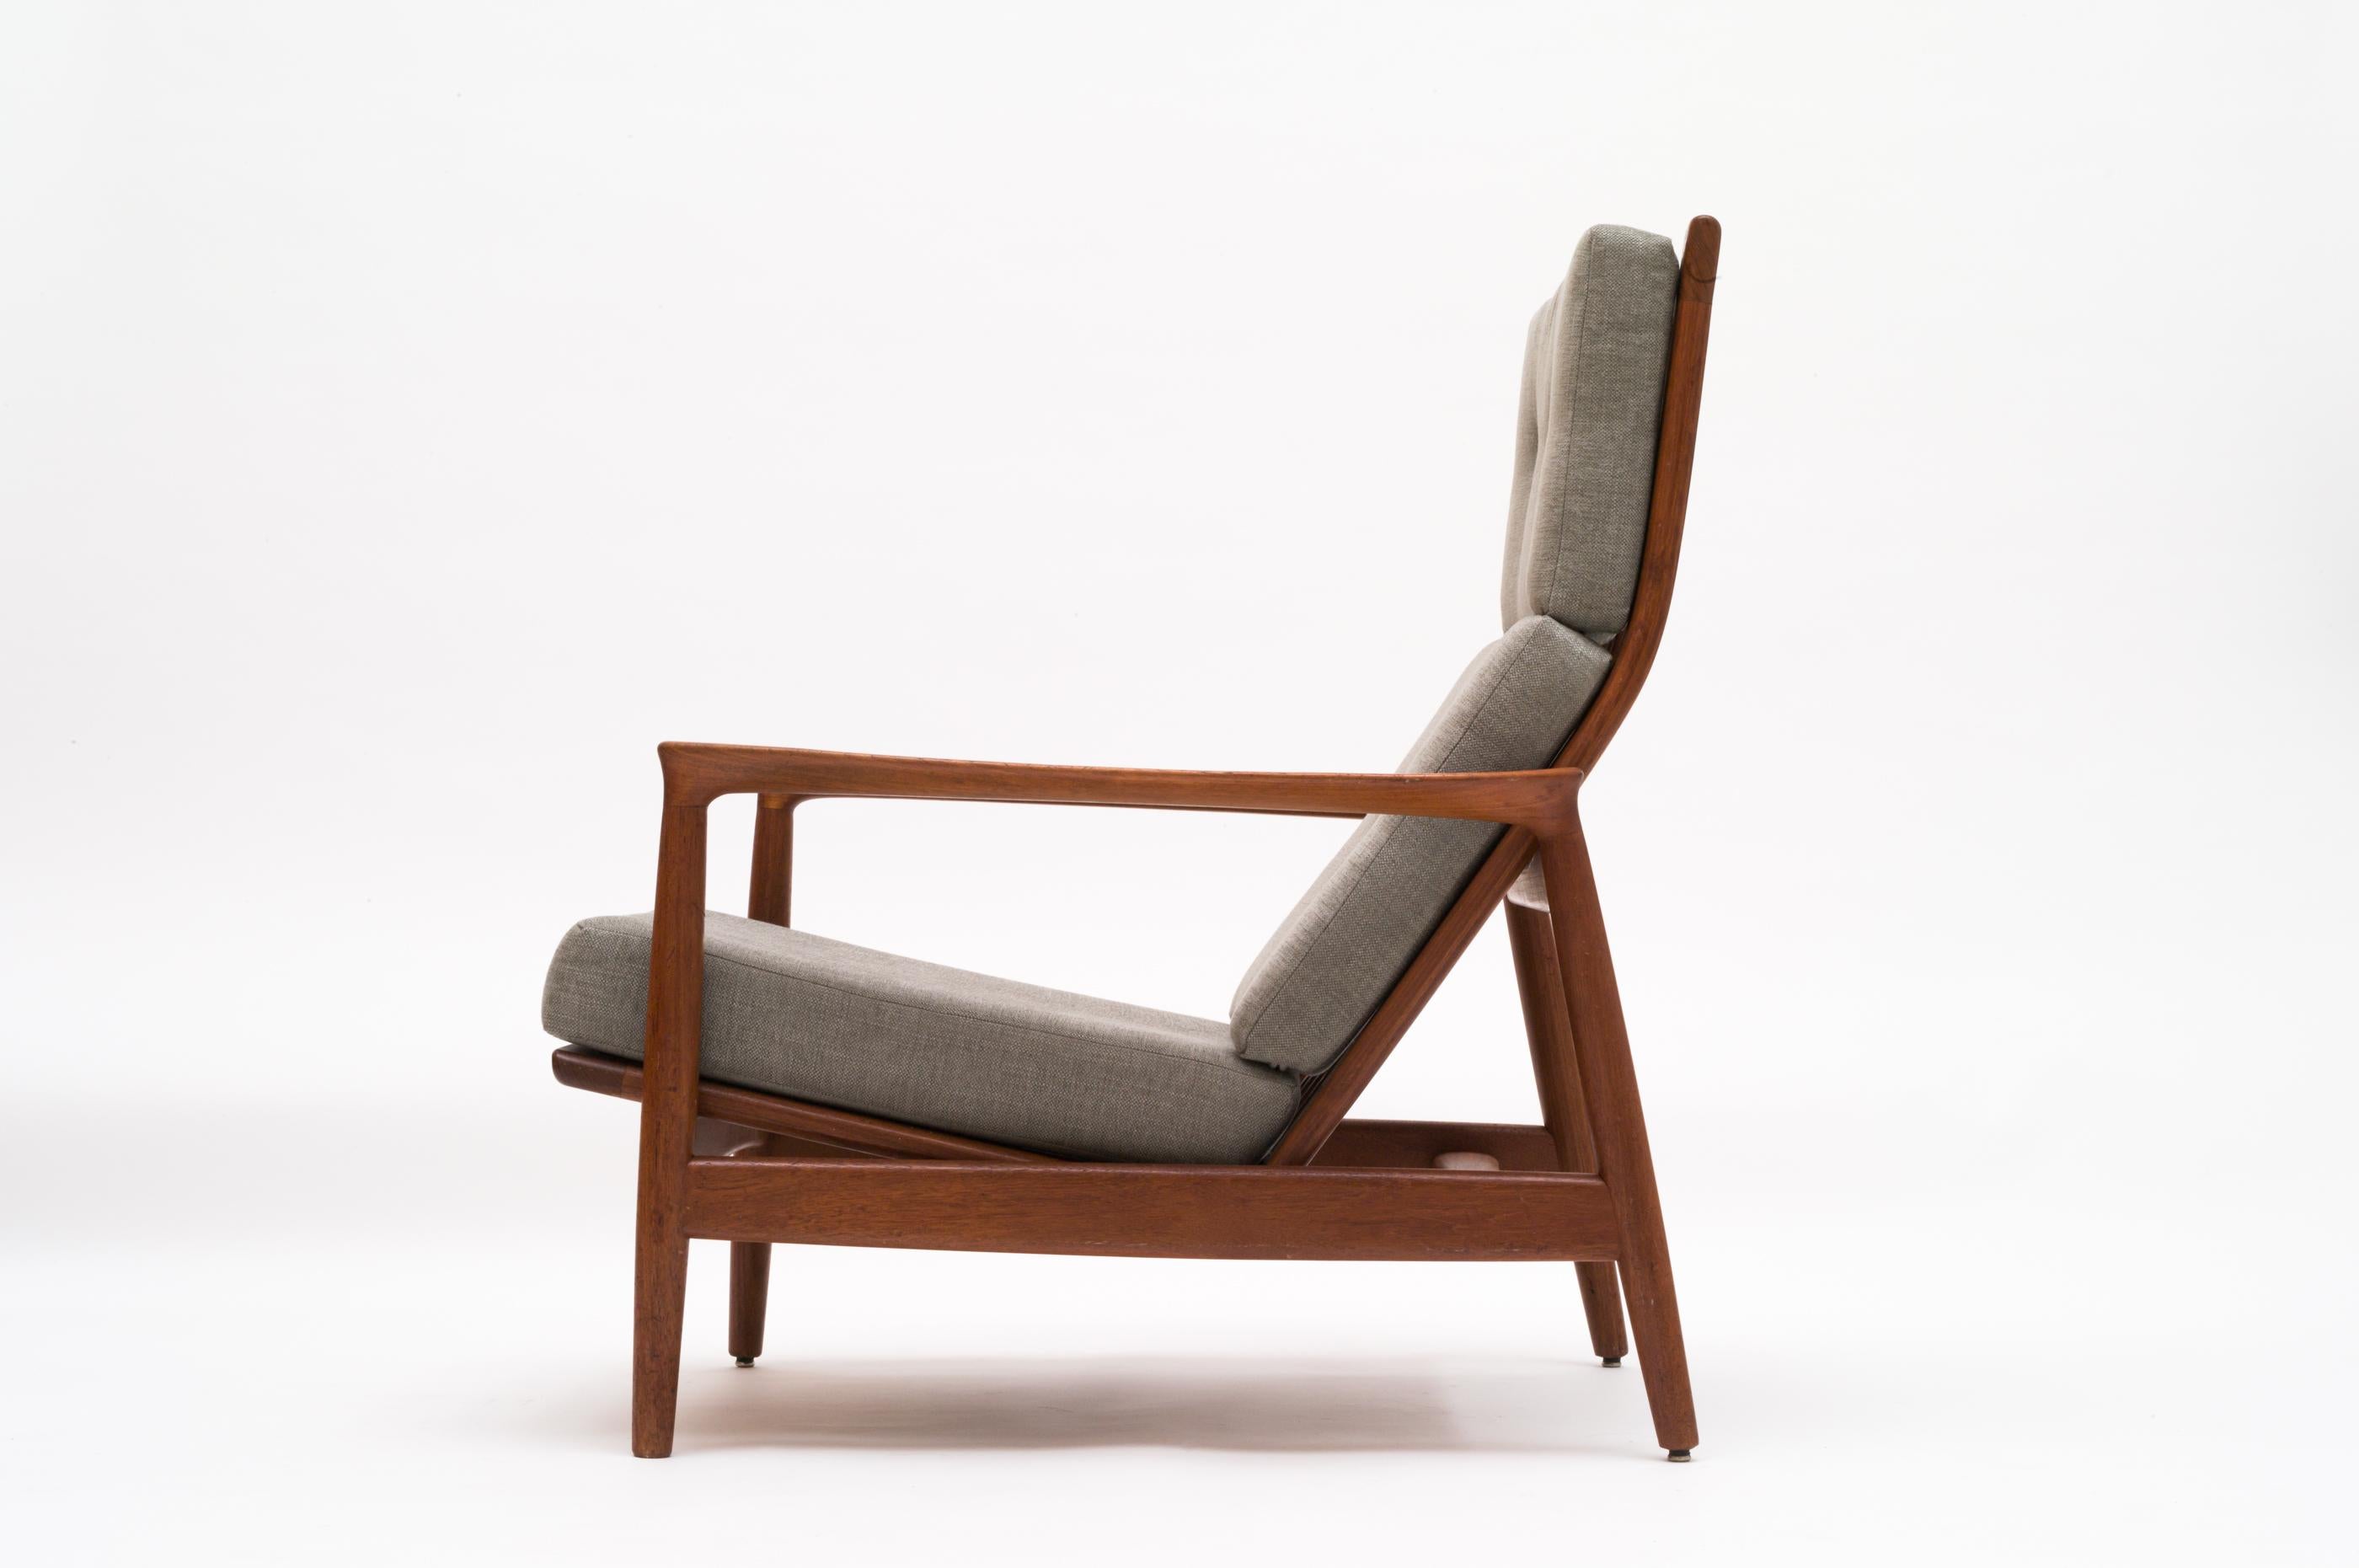 Tall back armchair designed by Folke Ohlsson for DUX in the 1960s. Model 